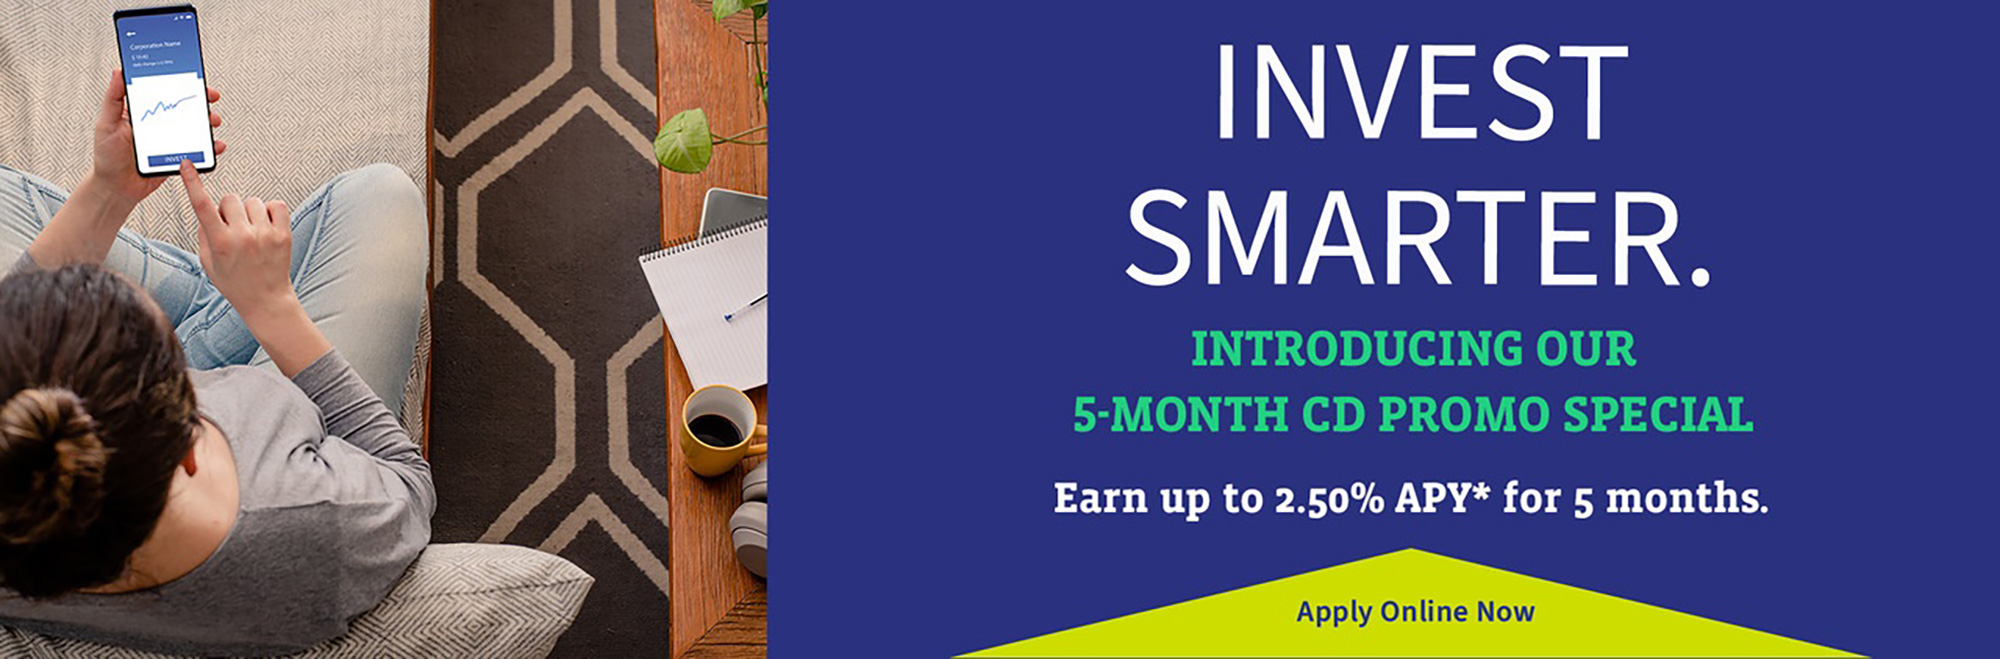 Invest Smarter. Introducing our 5-month CD Promo Special. 1.50% APY. Apply Online Now.